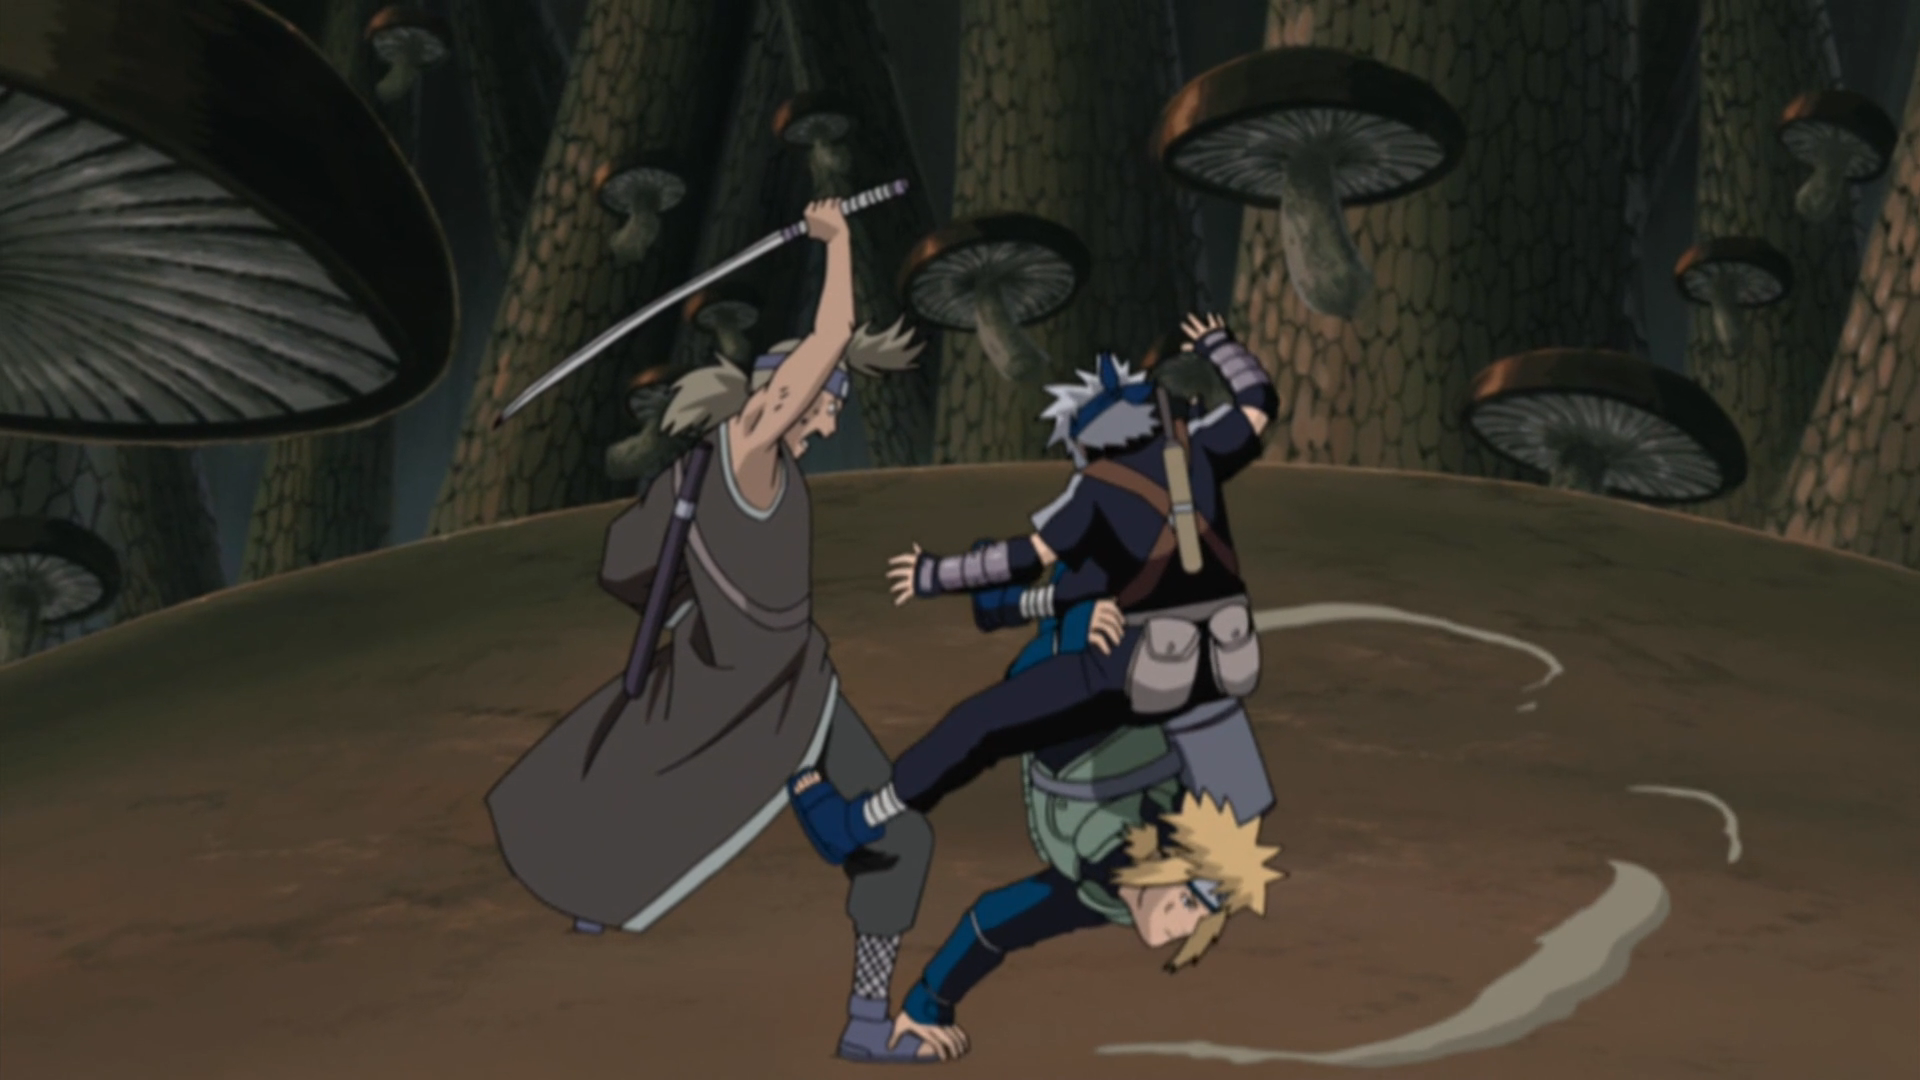 Why Did Kakashi Kill Rin in 'Naruto' and What Episode Did It